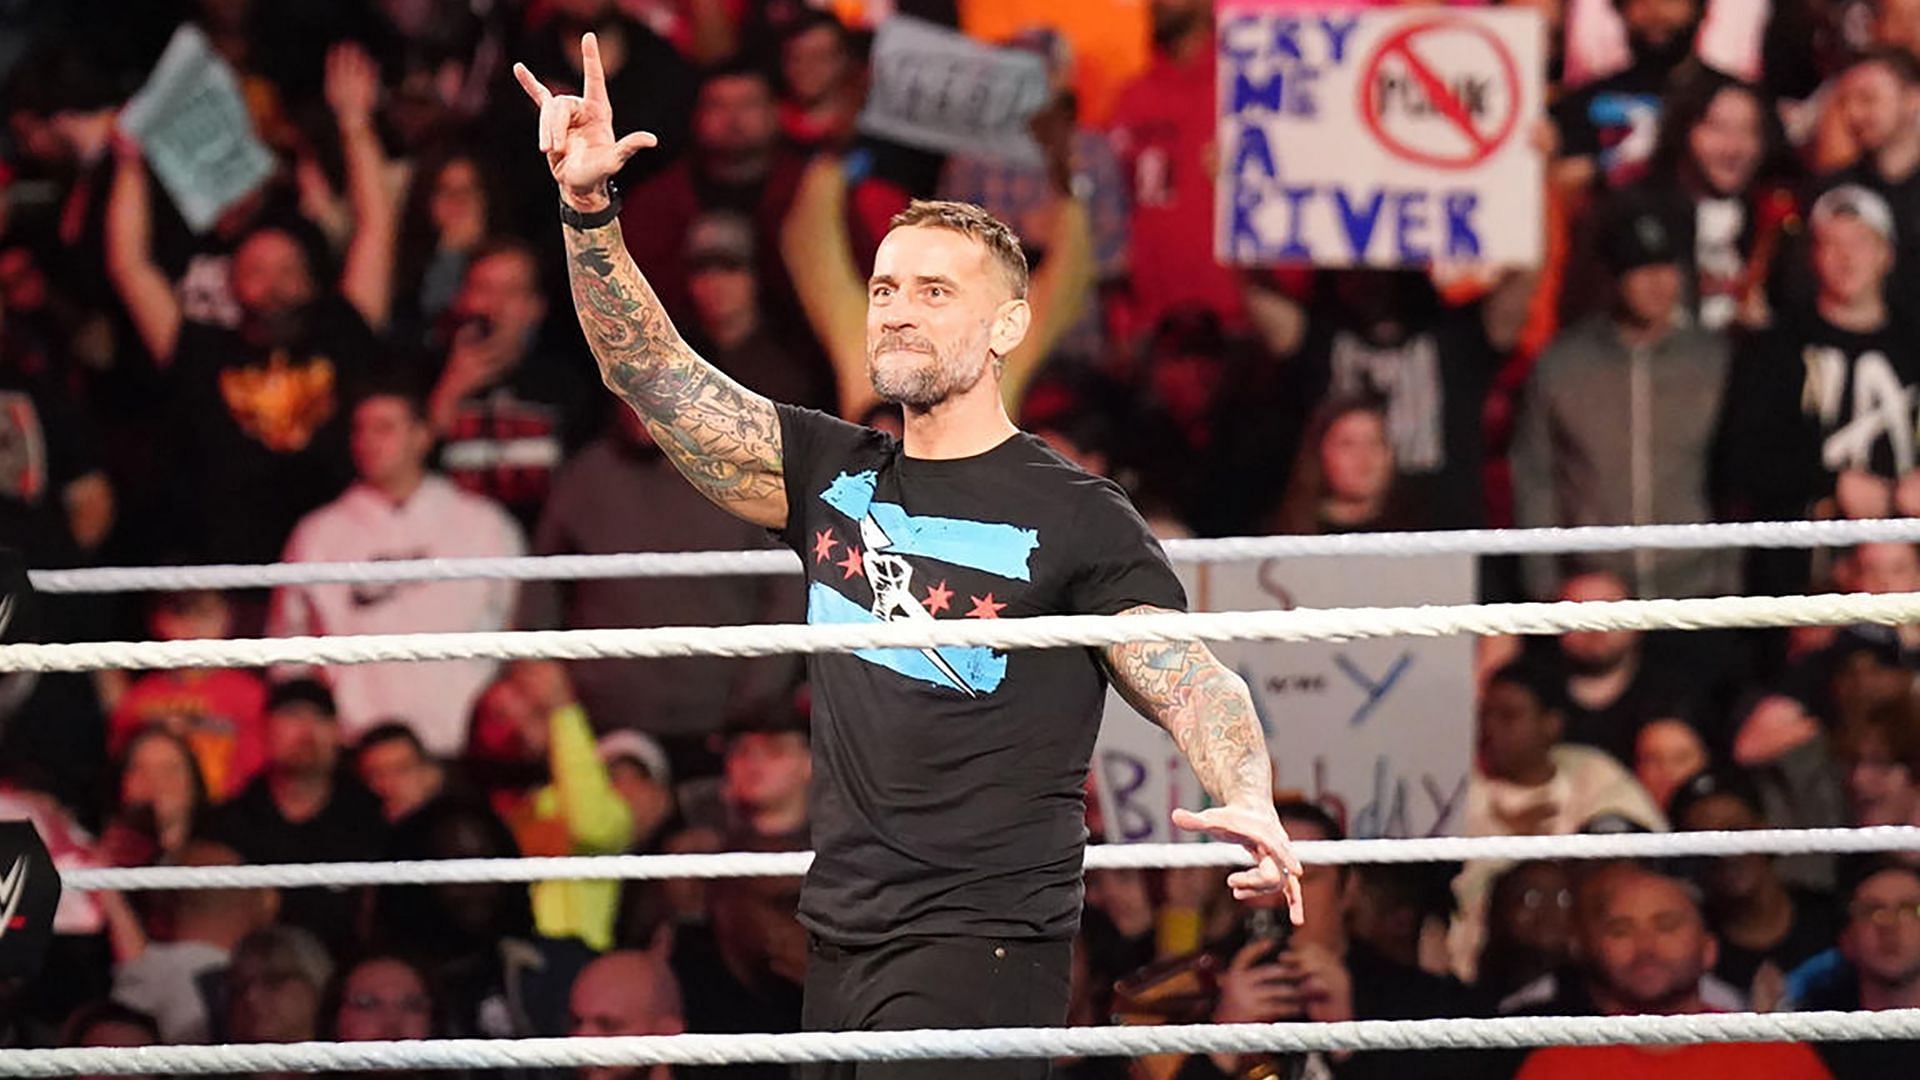 CM Punk speaks to the crowd during WWE RAW return